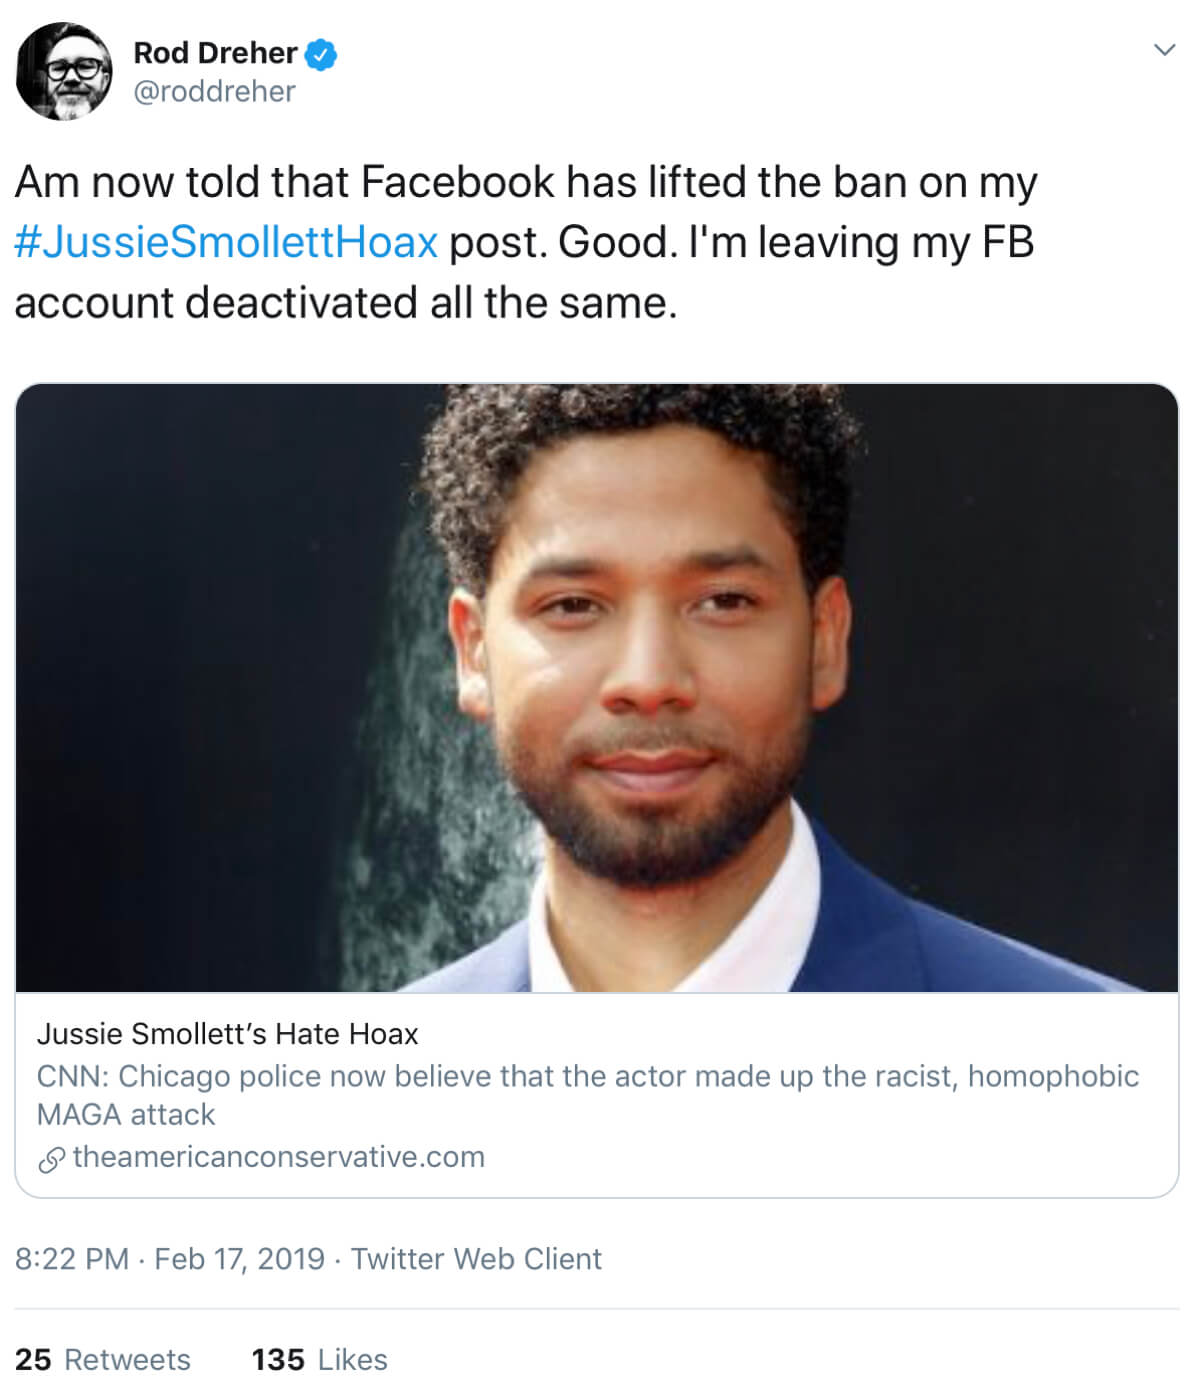 Rod Dreher's tweet about the Facebook ban on his Jussie Smollet article being lifted.